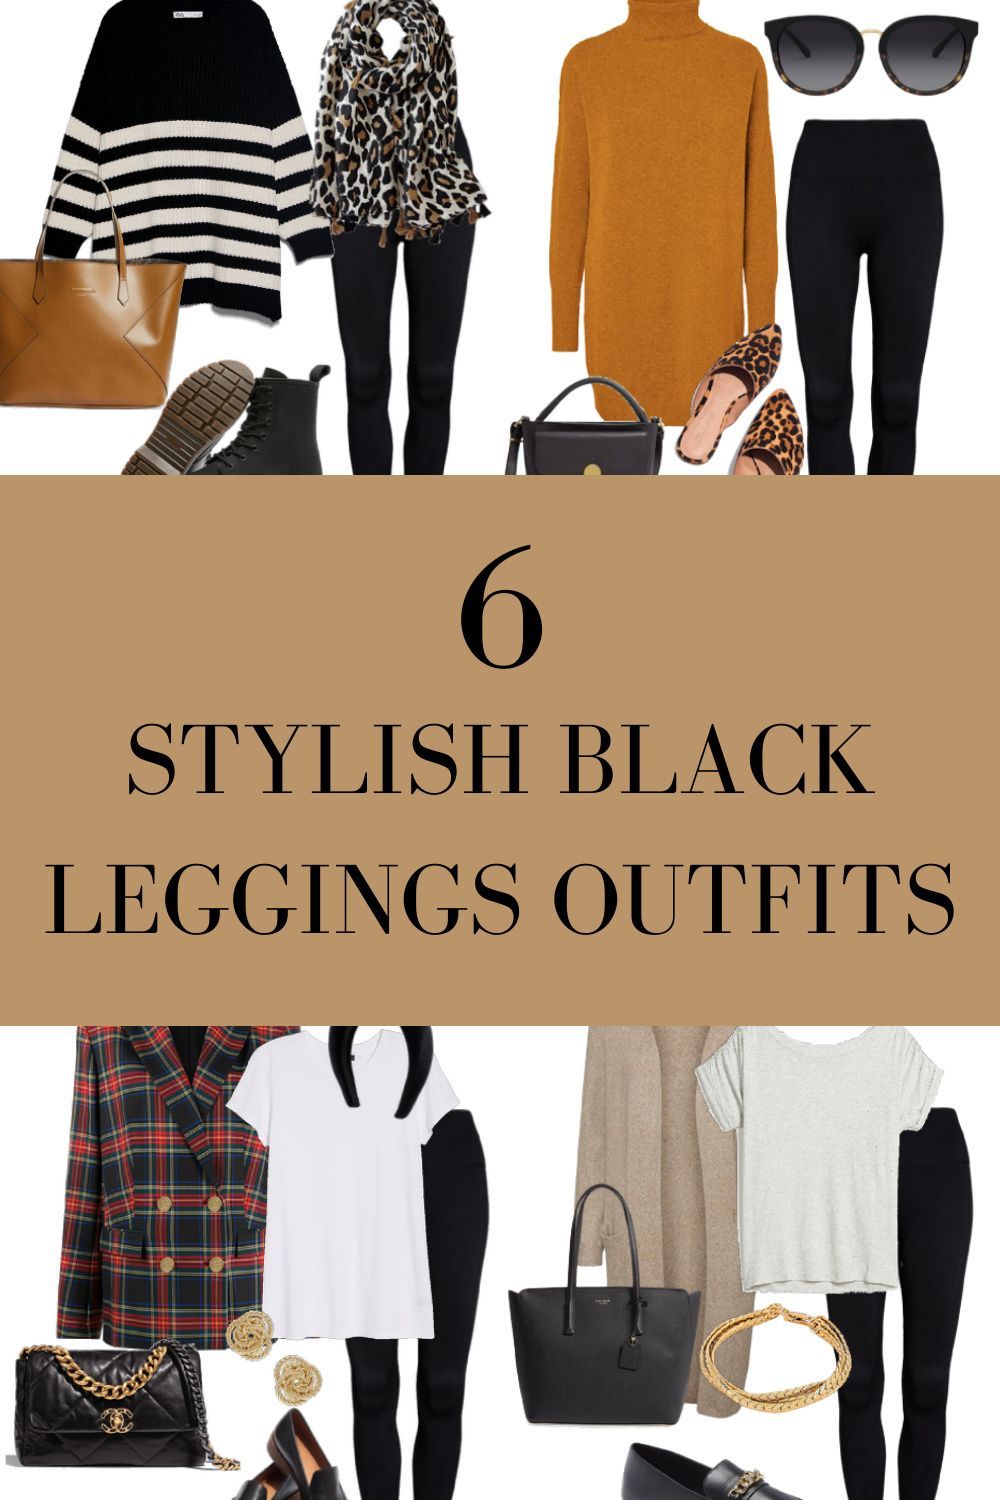 5+ Fashionable Ways to Wear Black Leggings - MY CHIC OBSESSION